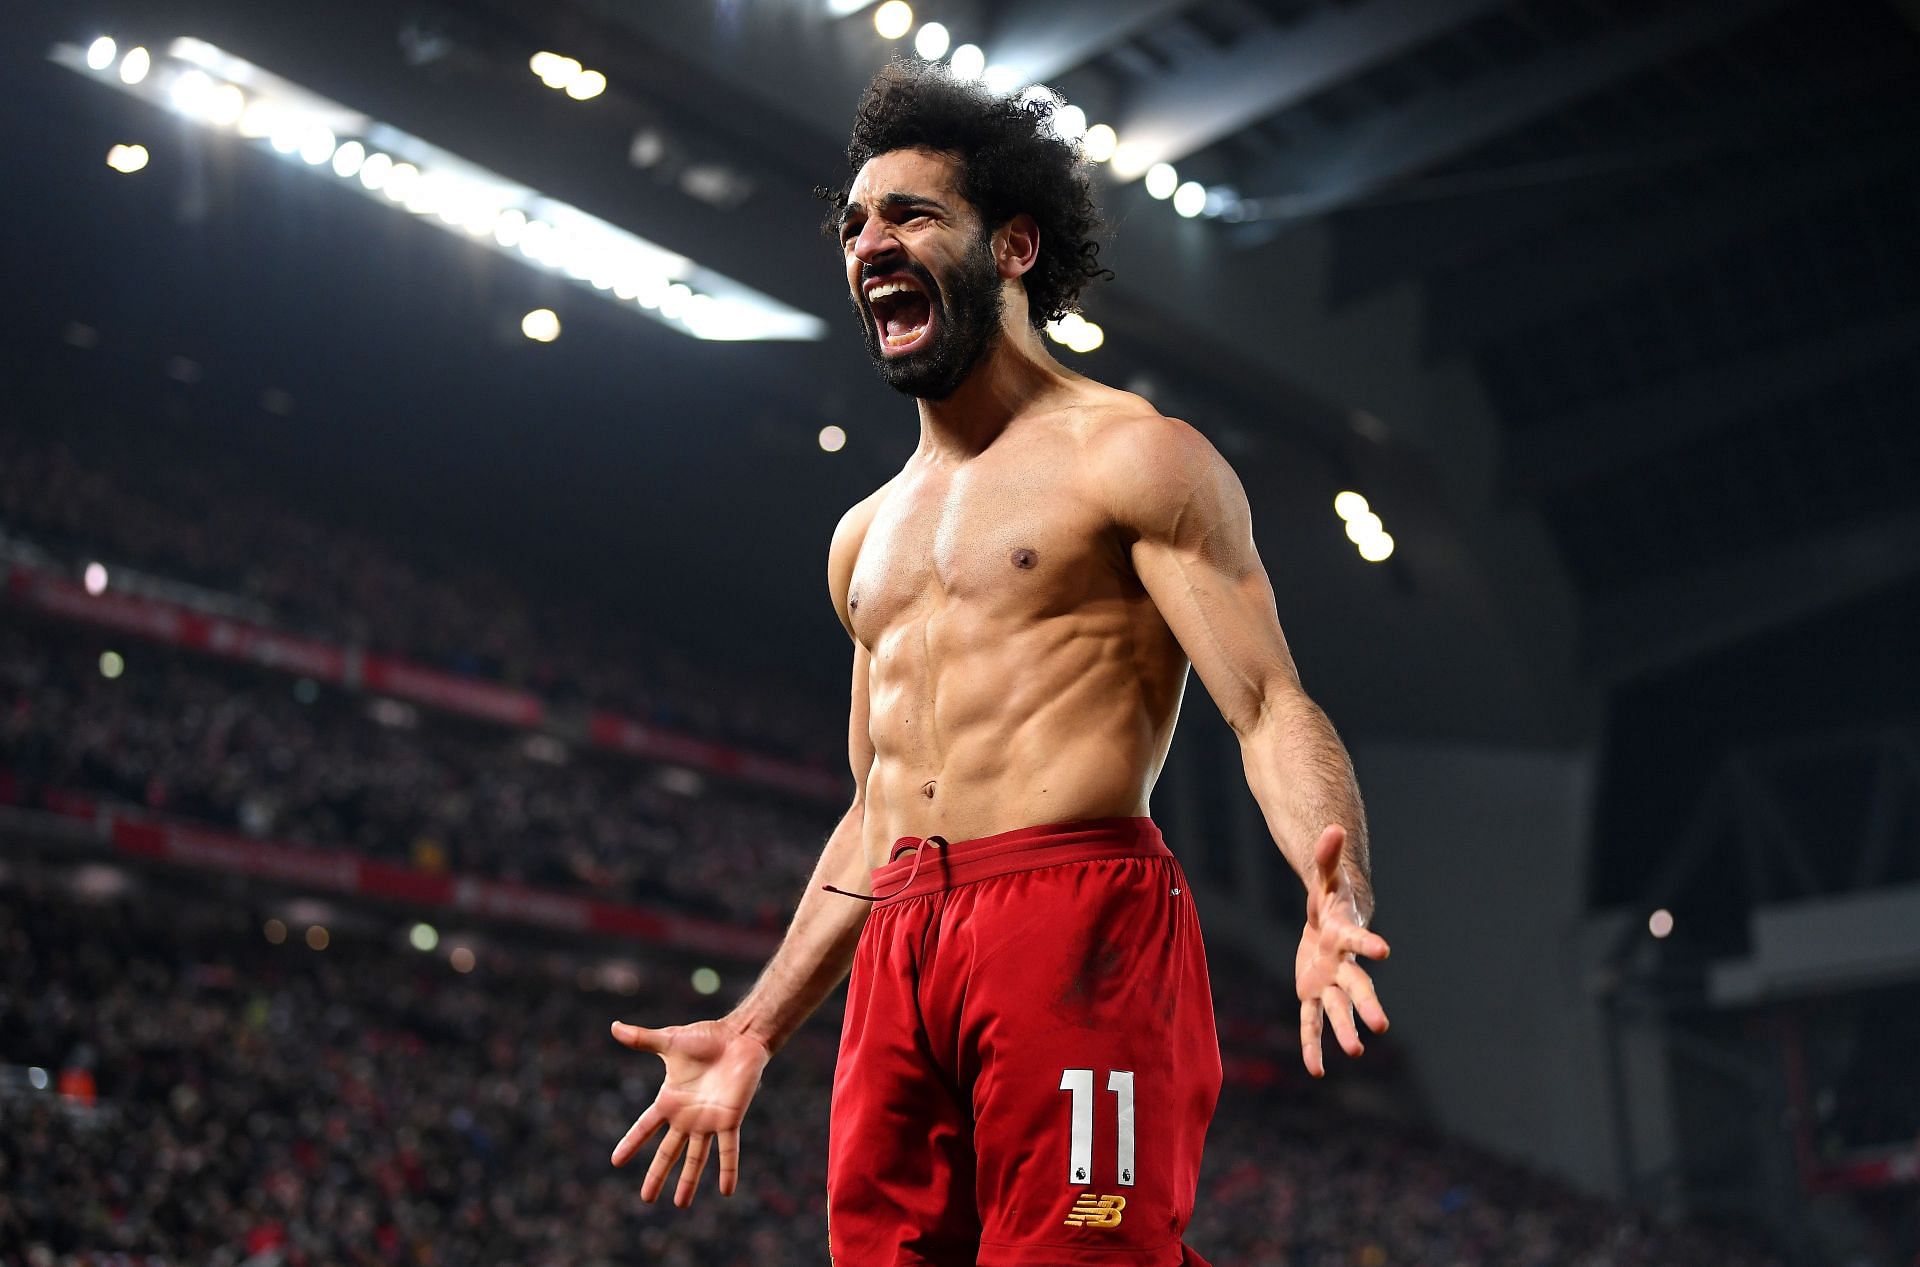 The Egyptian has been quite unstoppable this season